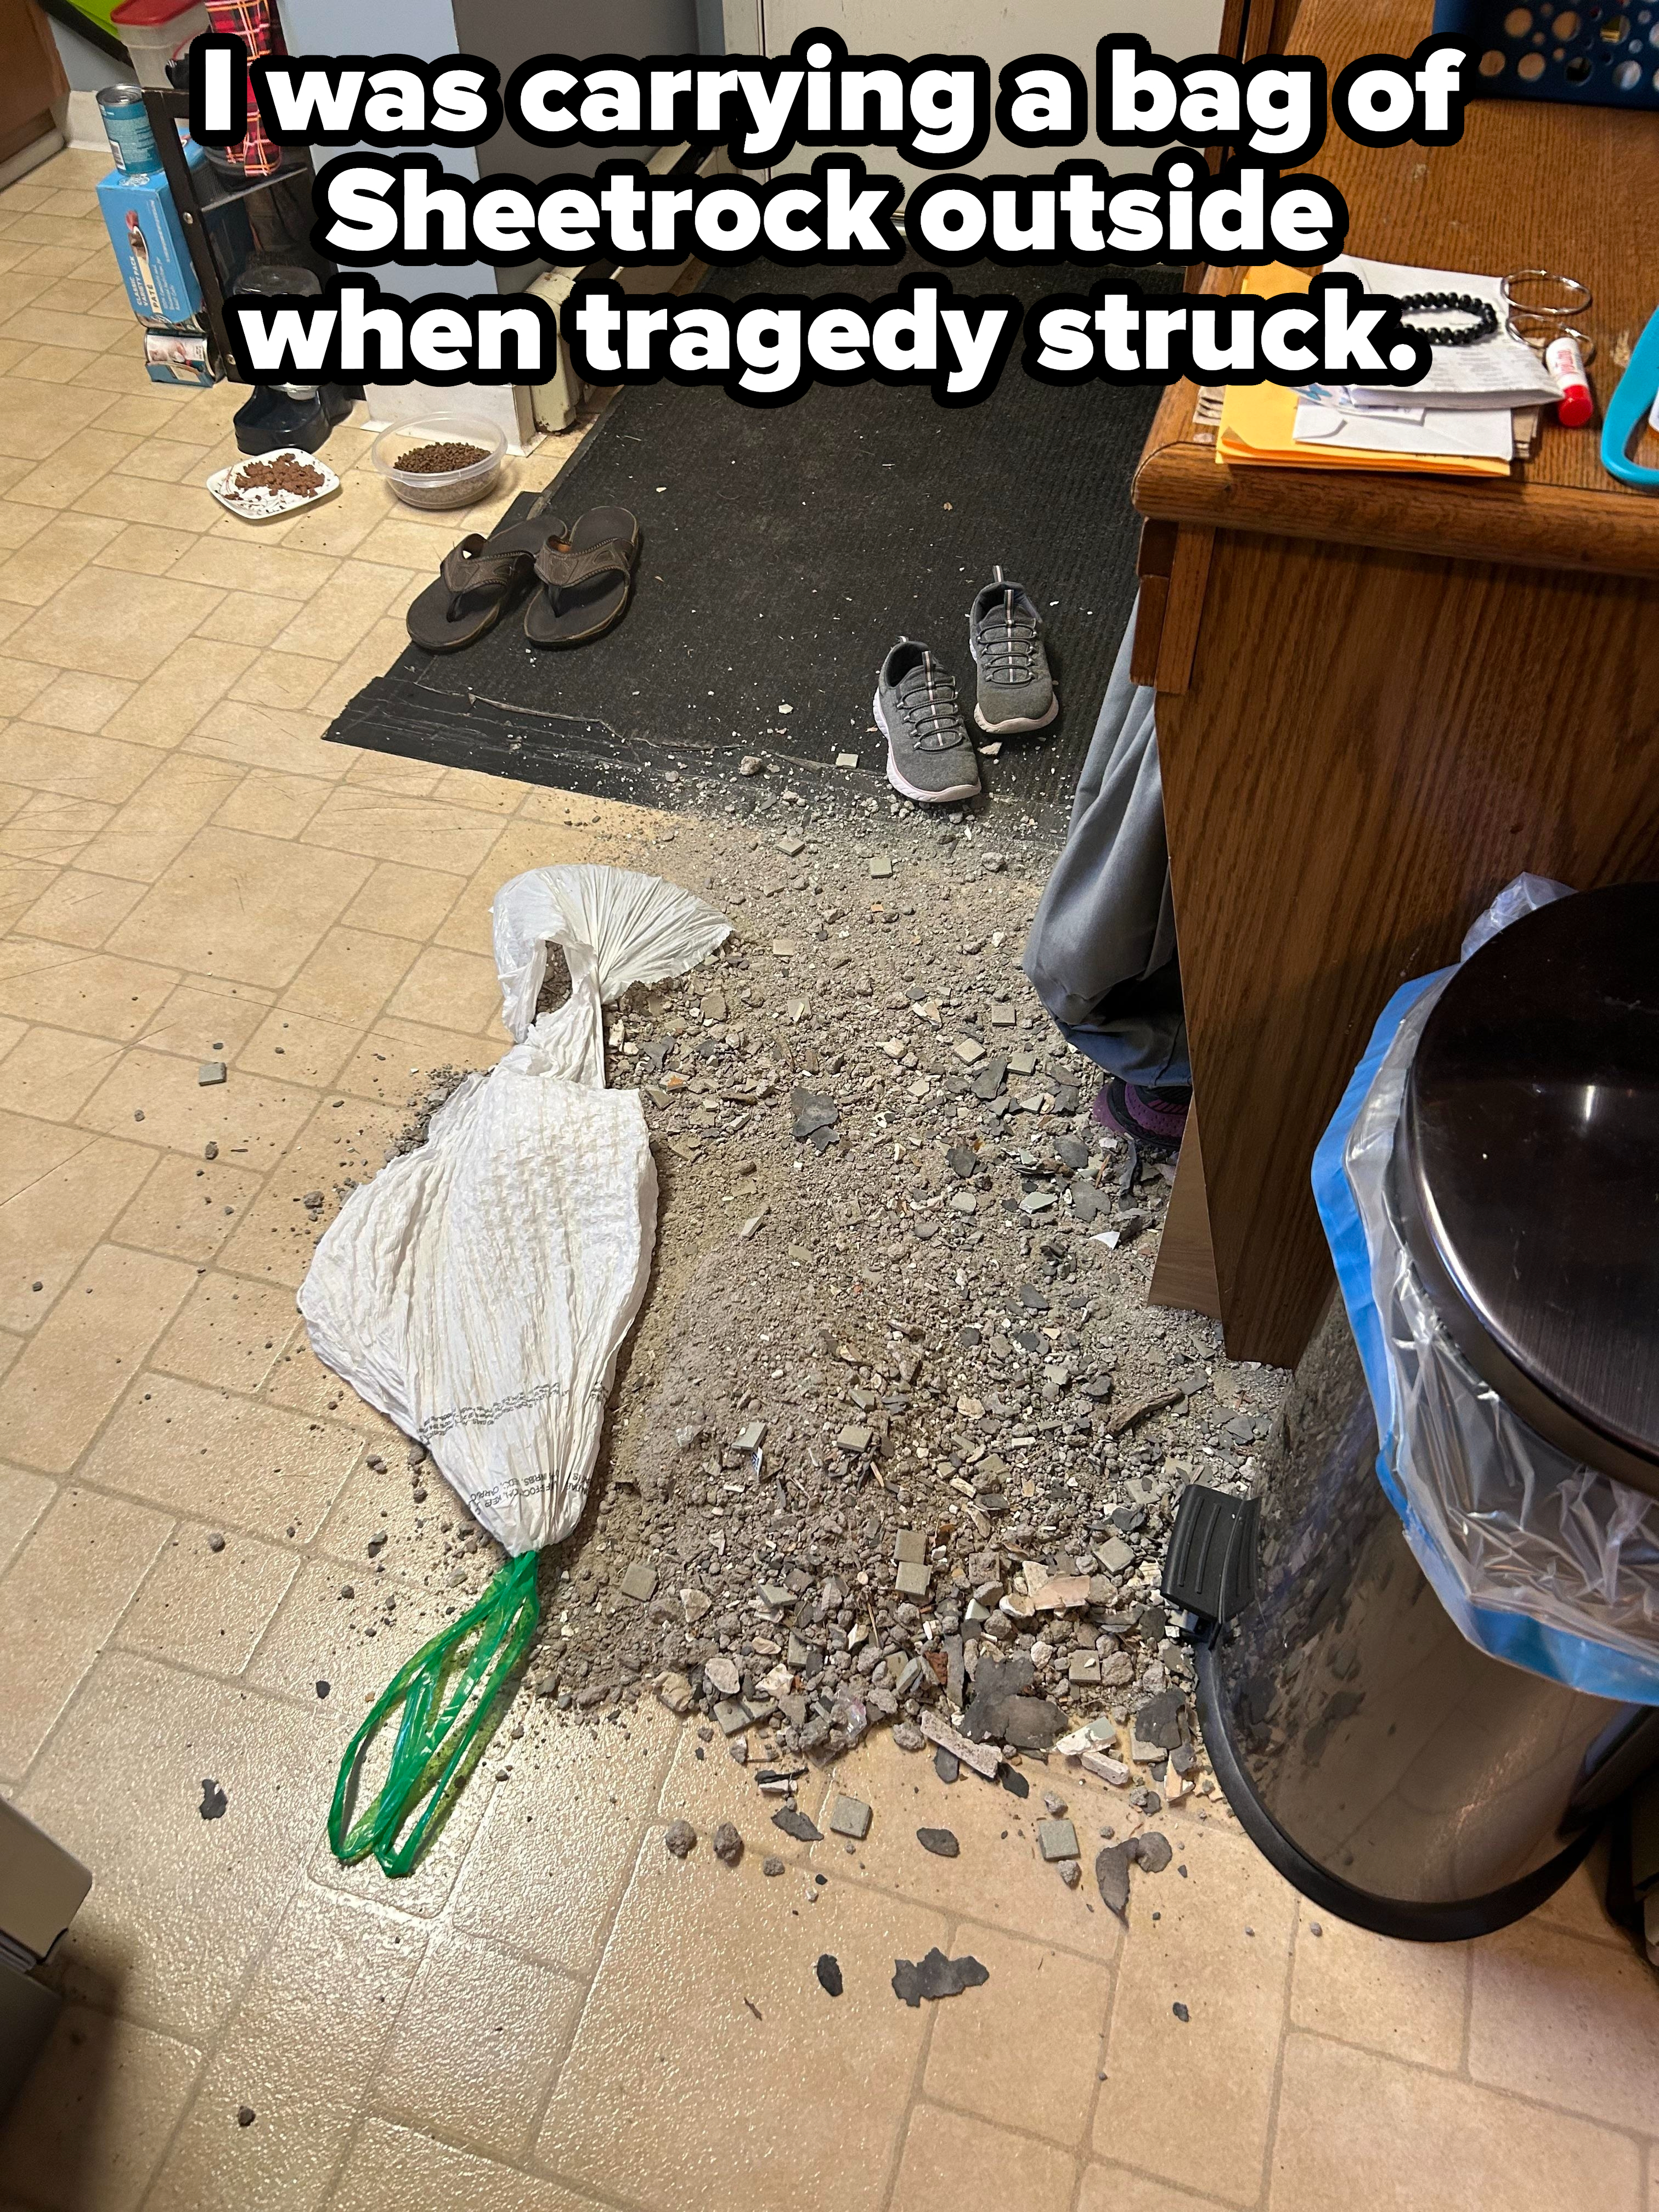 A torn bag with dirt, debris, and drywall scattered all over a kitchen floor, with caption &quot;I was carrying a bag of Sheetrock outside when tragedy struck&quot;